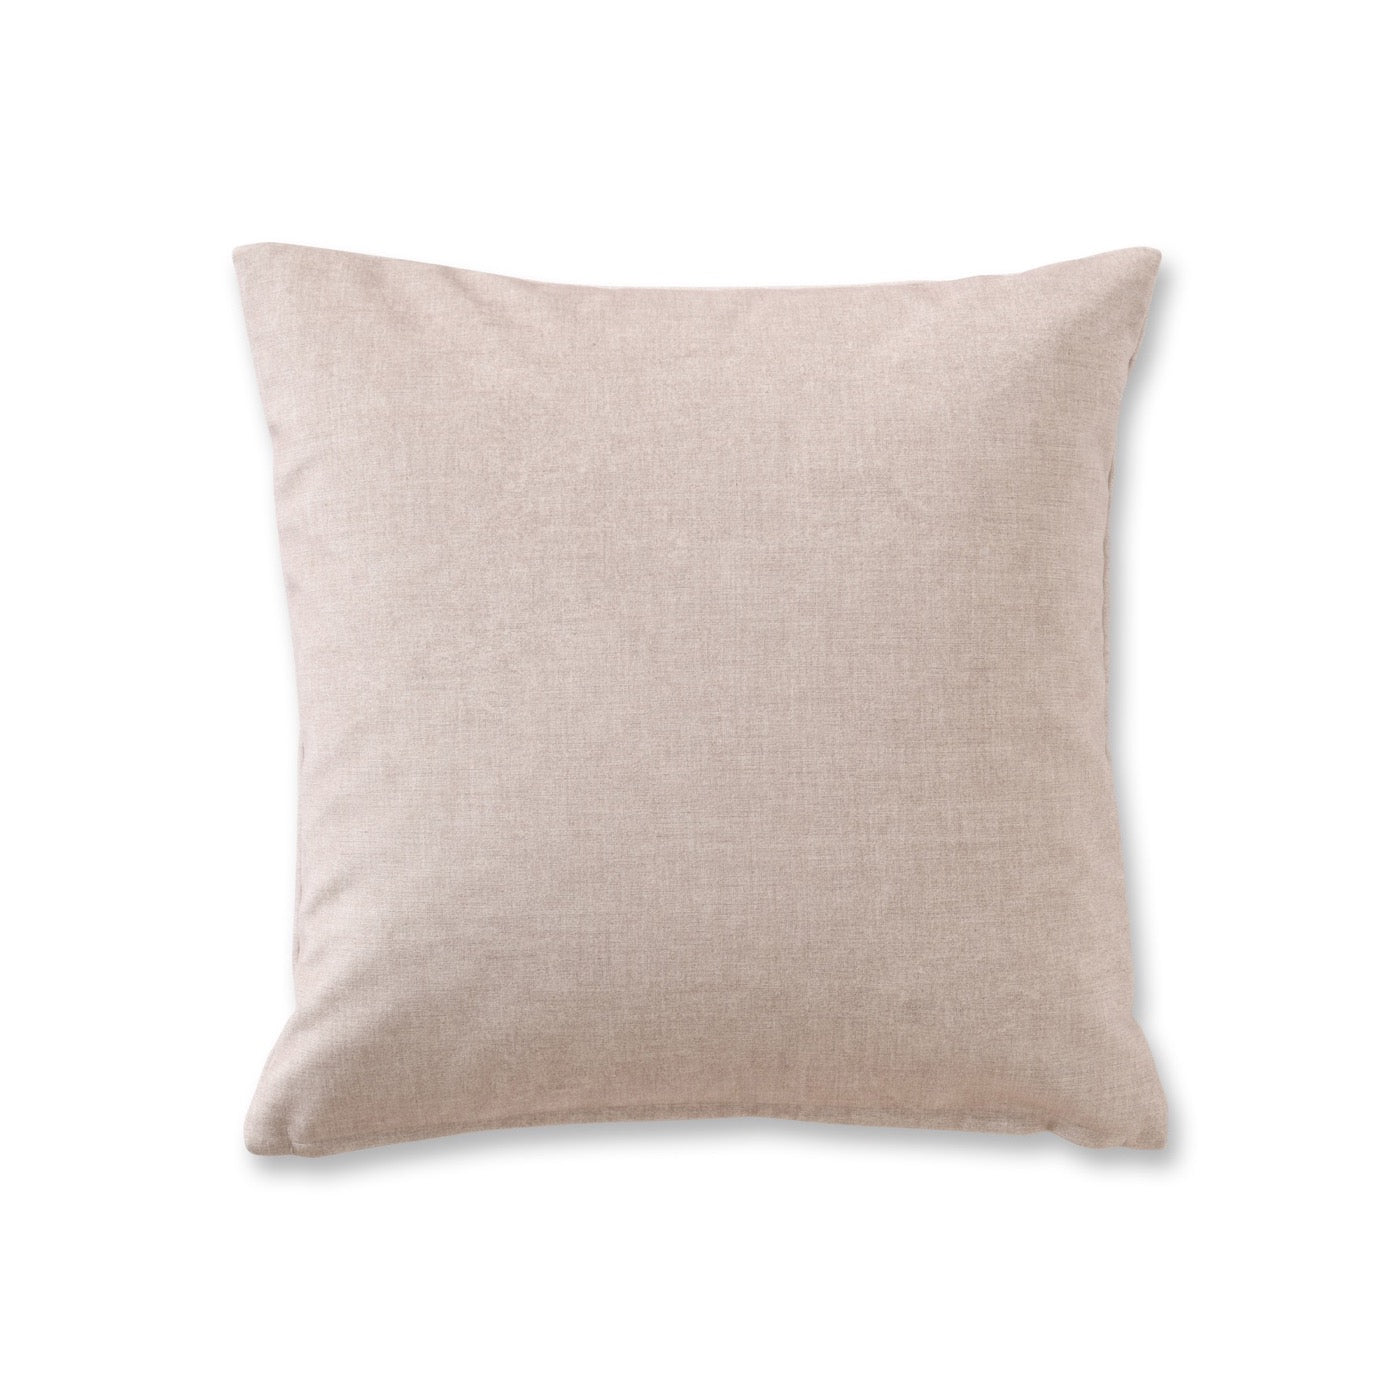 CUSHION  DELUXE10  450×450mm